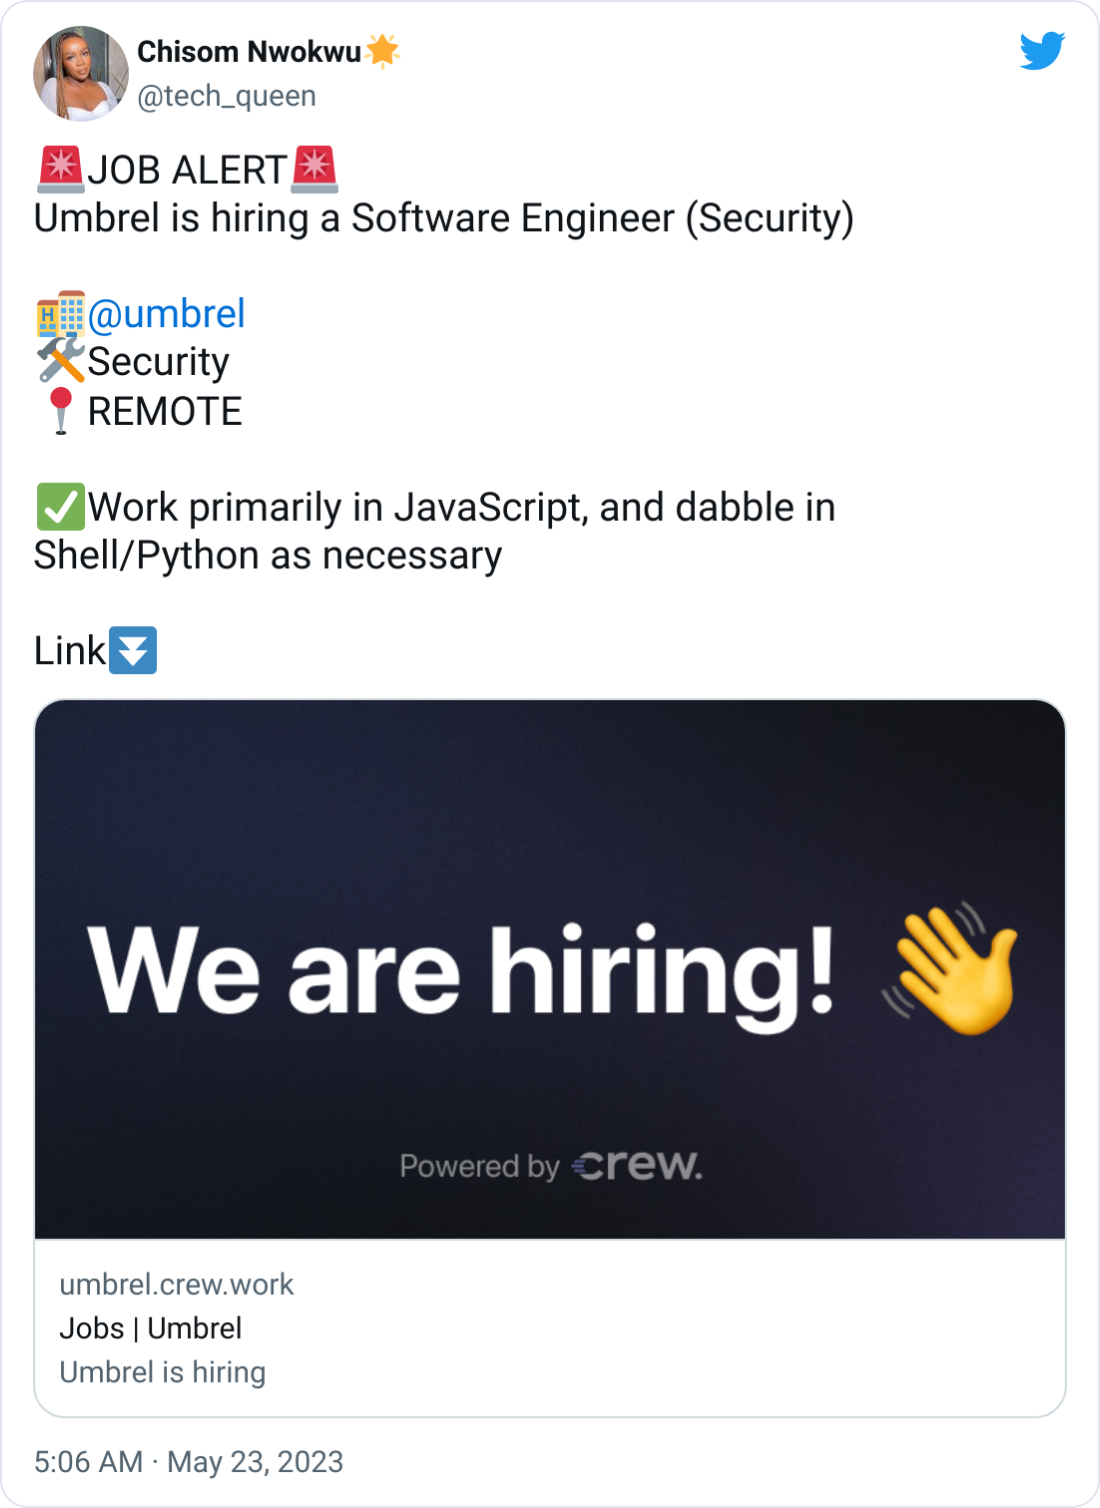  Chisom Nwokwu🌟 @tech_queen 🚨JOB ALERT🚨 Umbrel is hiring a Software Engineer (Security)  🏨 @umbrel  🛠️Security 📍REMOTE  ✅Work primarily in JavaScript, and dabble in Shell/Python as necessary